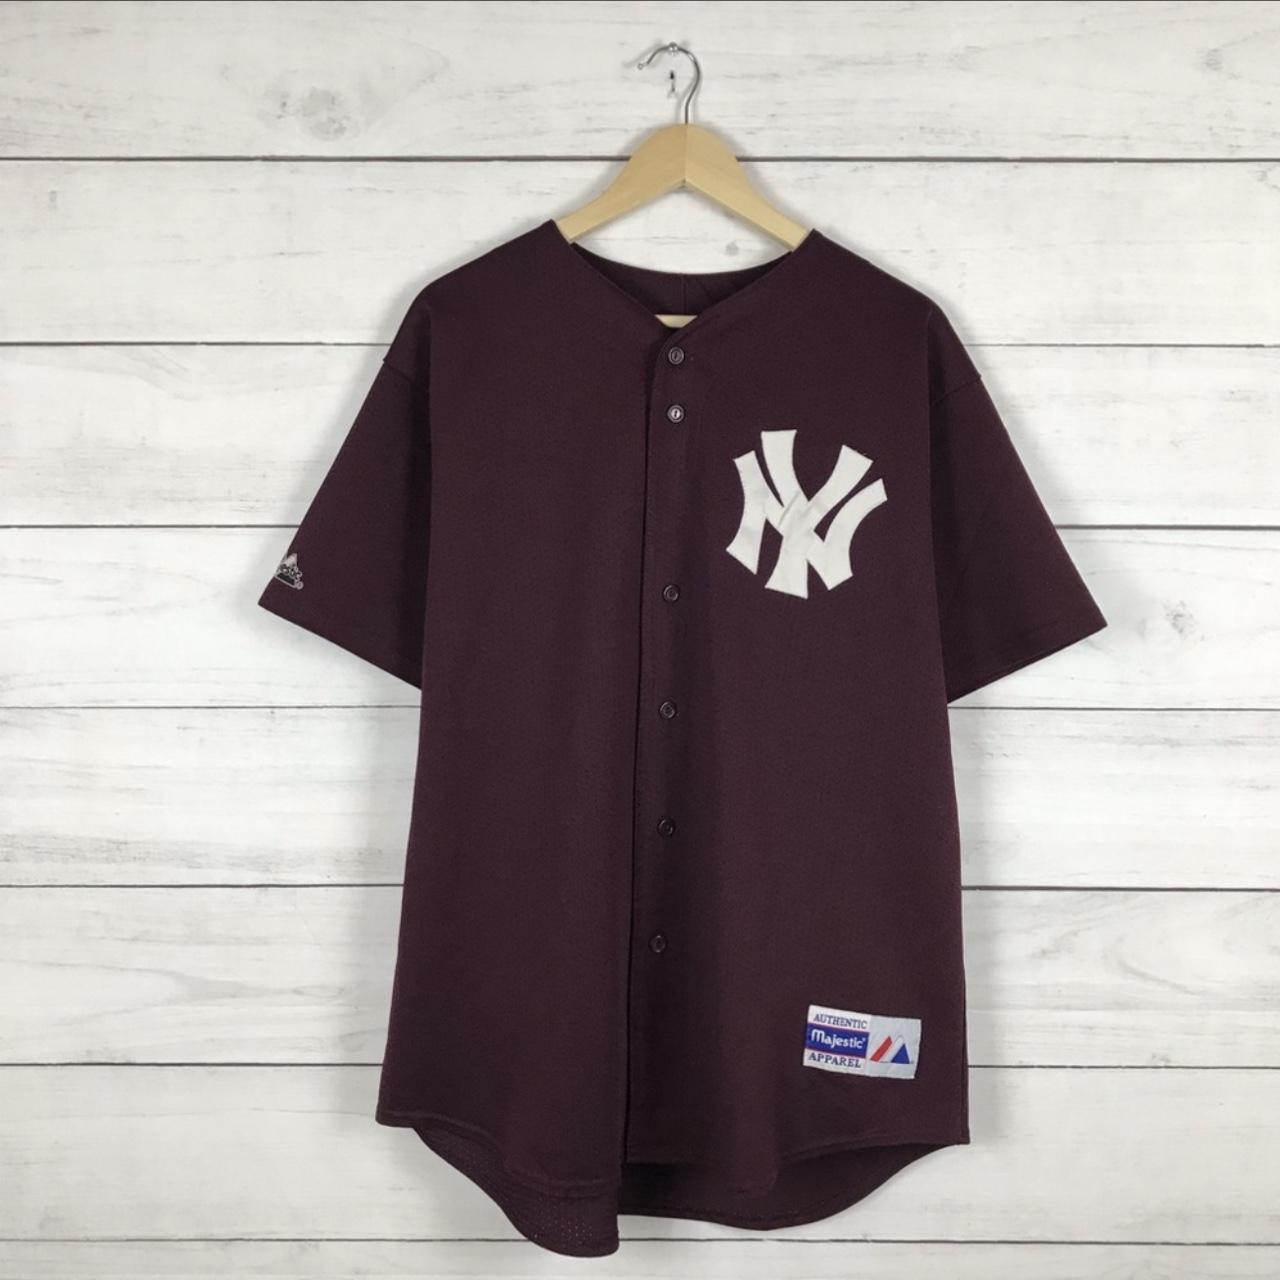 Authentic New York Yankees adidas jersey This - Depop